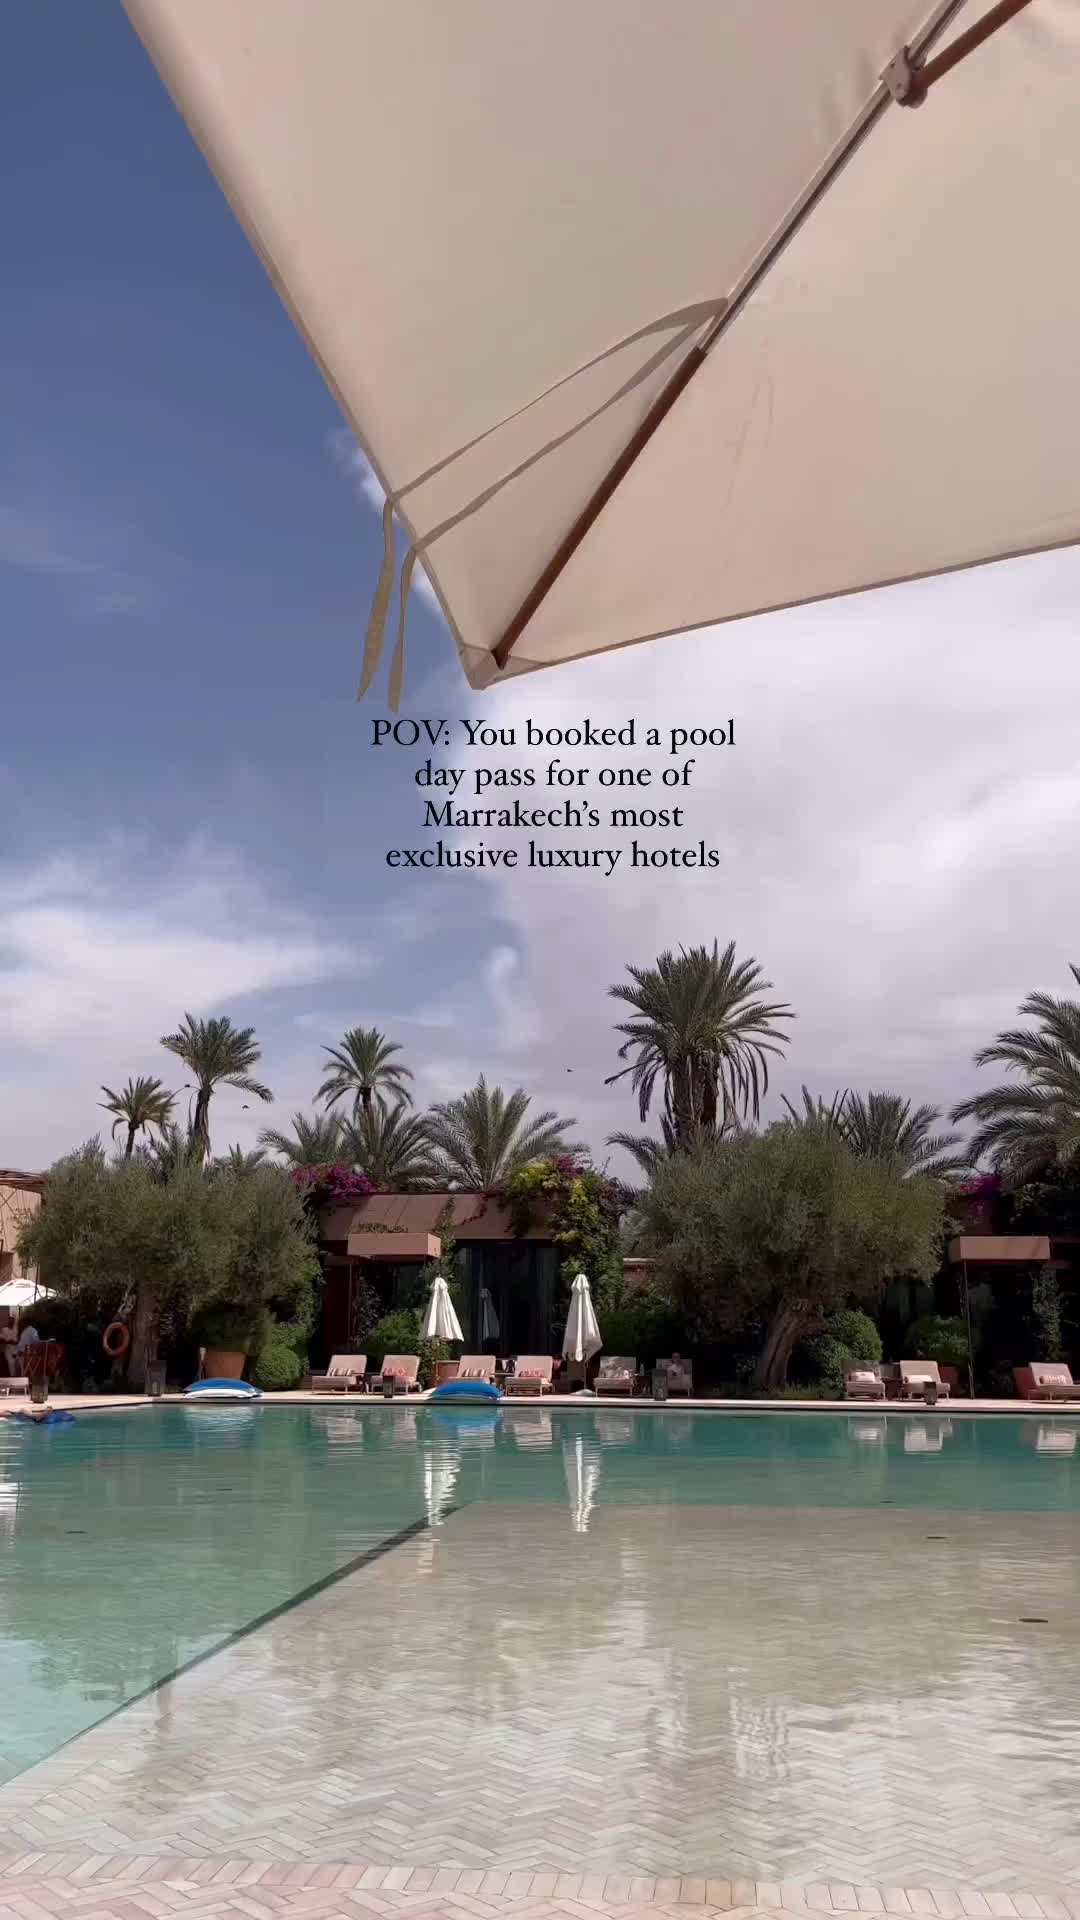 You must save this idea for your next trip to Marrakech!

Indulge in a day of 5 star luxury in Marrakech by booking a pool day pass at the exquisite @royalmansour hotel. 

Not only do you get to spend a day at this huge tranquil pool but the day pass also includes a 3 course meal at the magnificent Le Jardin Restaurant. 

We found the service, atmosphere & cuisine exemplary (still talking about those desserts) and I’d book this experience again in a heartbeat. 

I visited with my girlfriends but families are welcome - the day pass is FREE for children under 6 and discounted by 50% for children aged 6-12. 

For info on how to book, plus more great tips for visiting Marrakech, head to my blog linked in bio. 

#royalmansour #luxurytravel #marrakech #visitmarrakech #luxuryhotels